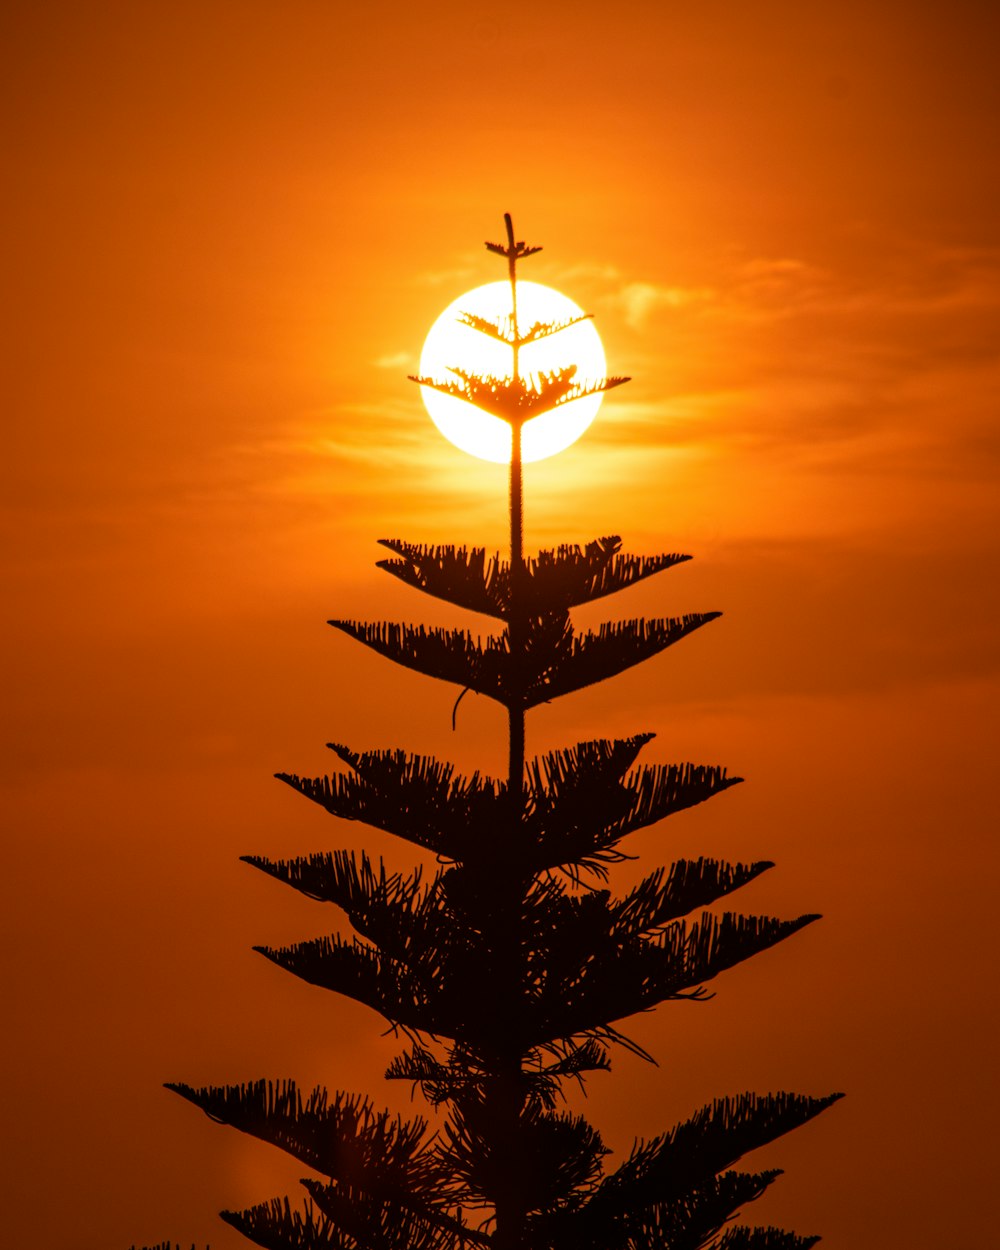 the sun is setting behind a tall tree